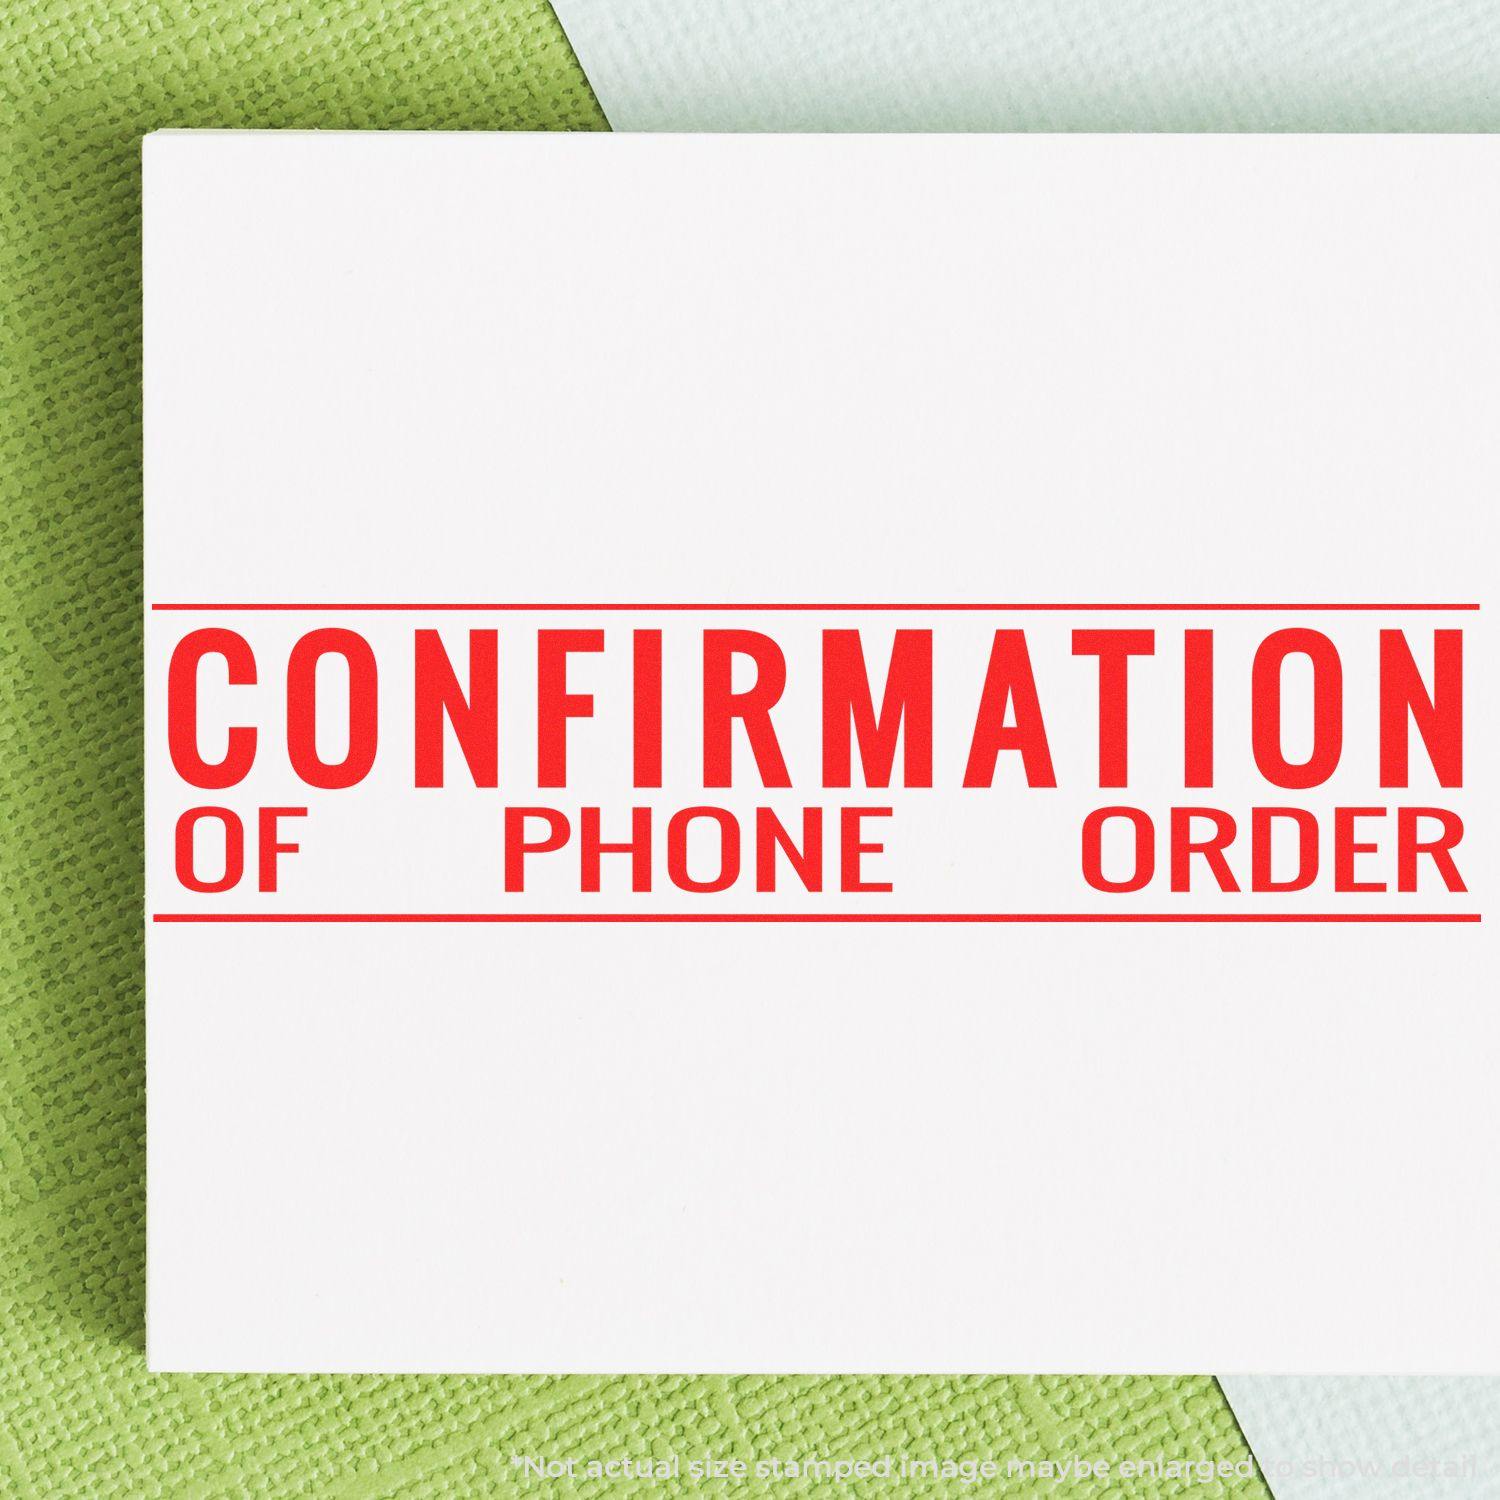 A self-inking stamp with a stamped image showing how the text "CONFIRMATION OF PHONE ORDER" ("CONFIRMATION" in a large font and "OF PHONE ORDER" in a small font) is displayed after stamping.